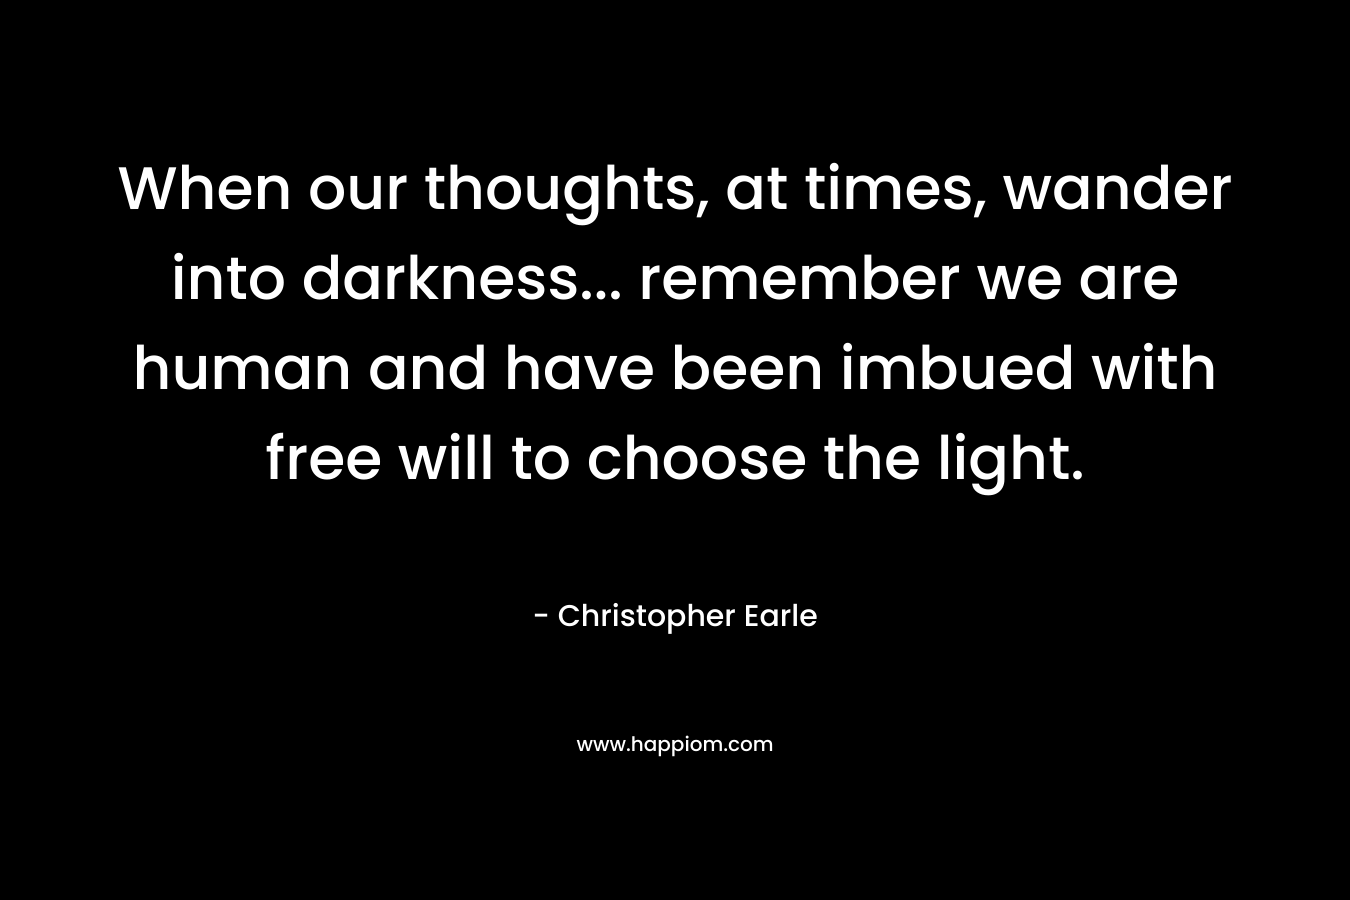 When our thoughts, at times, wander into darkness... remember we are human and have been imbued with free will to choose the light.